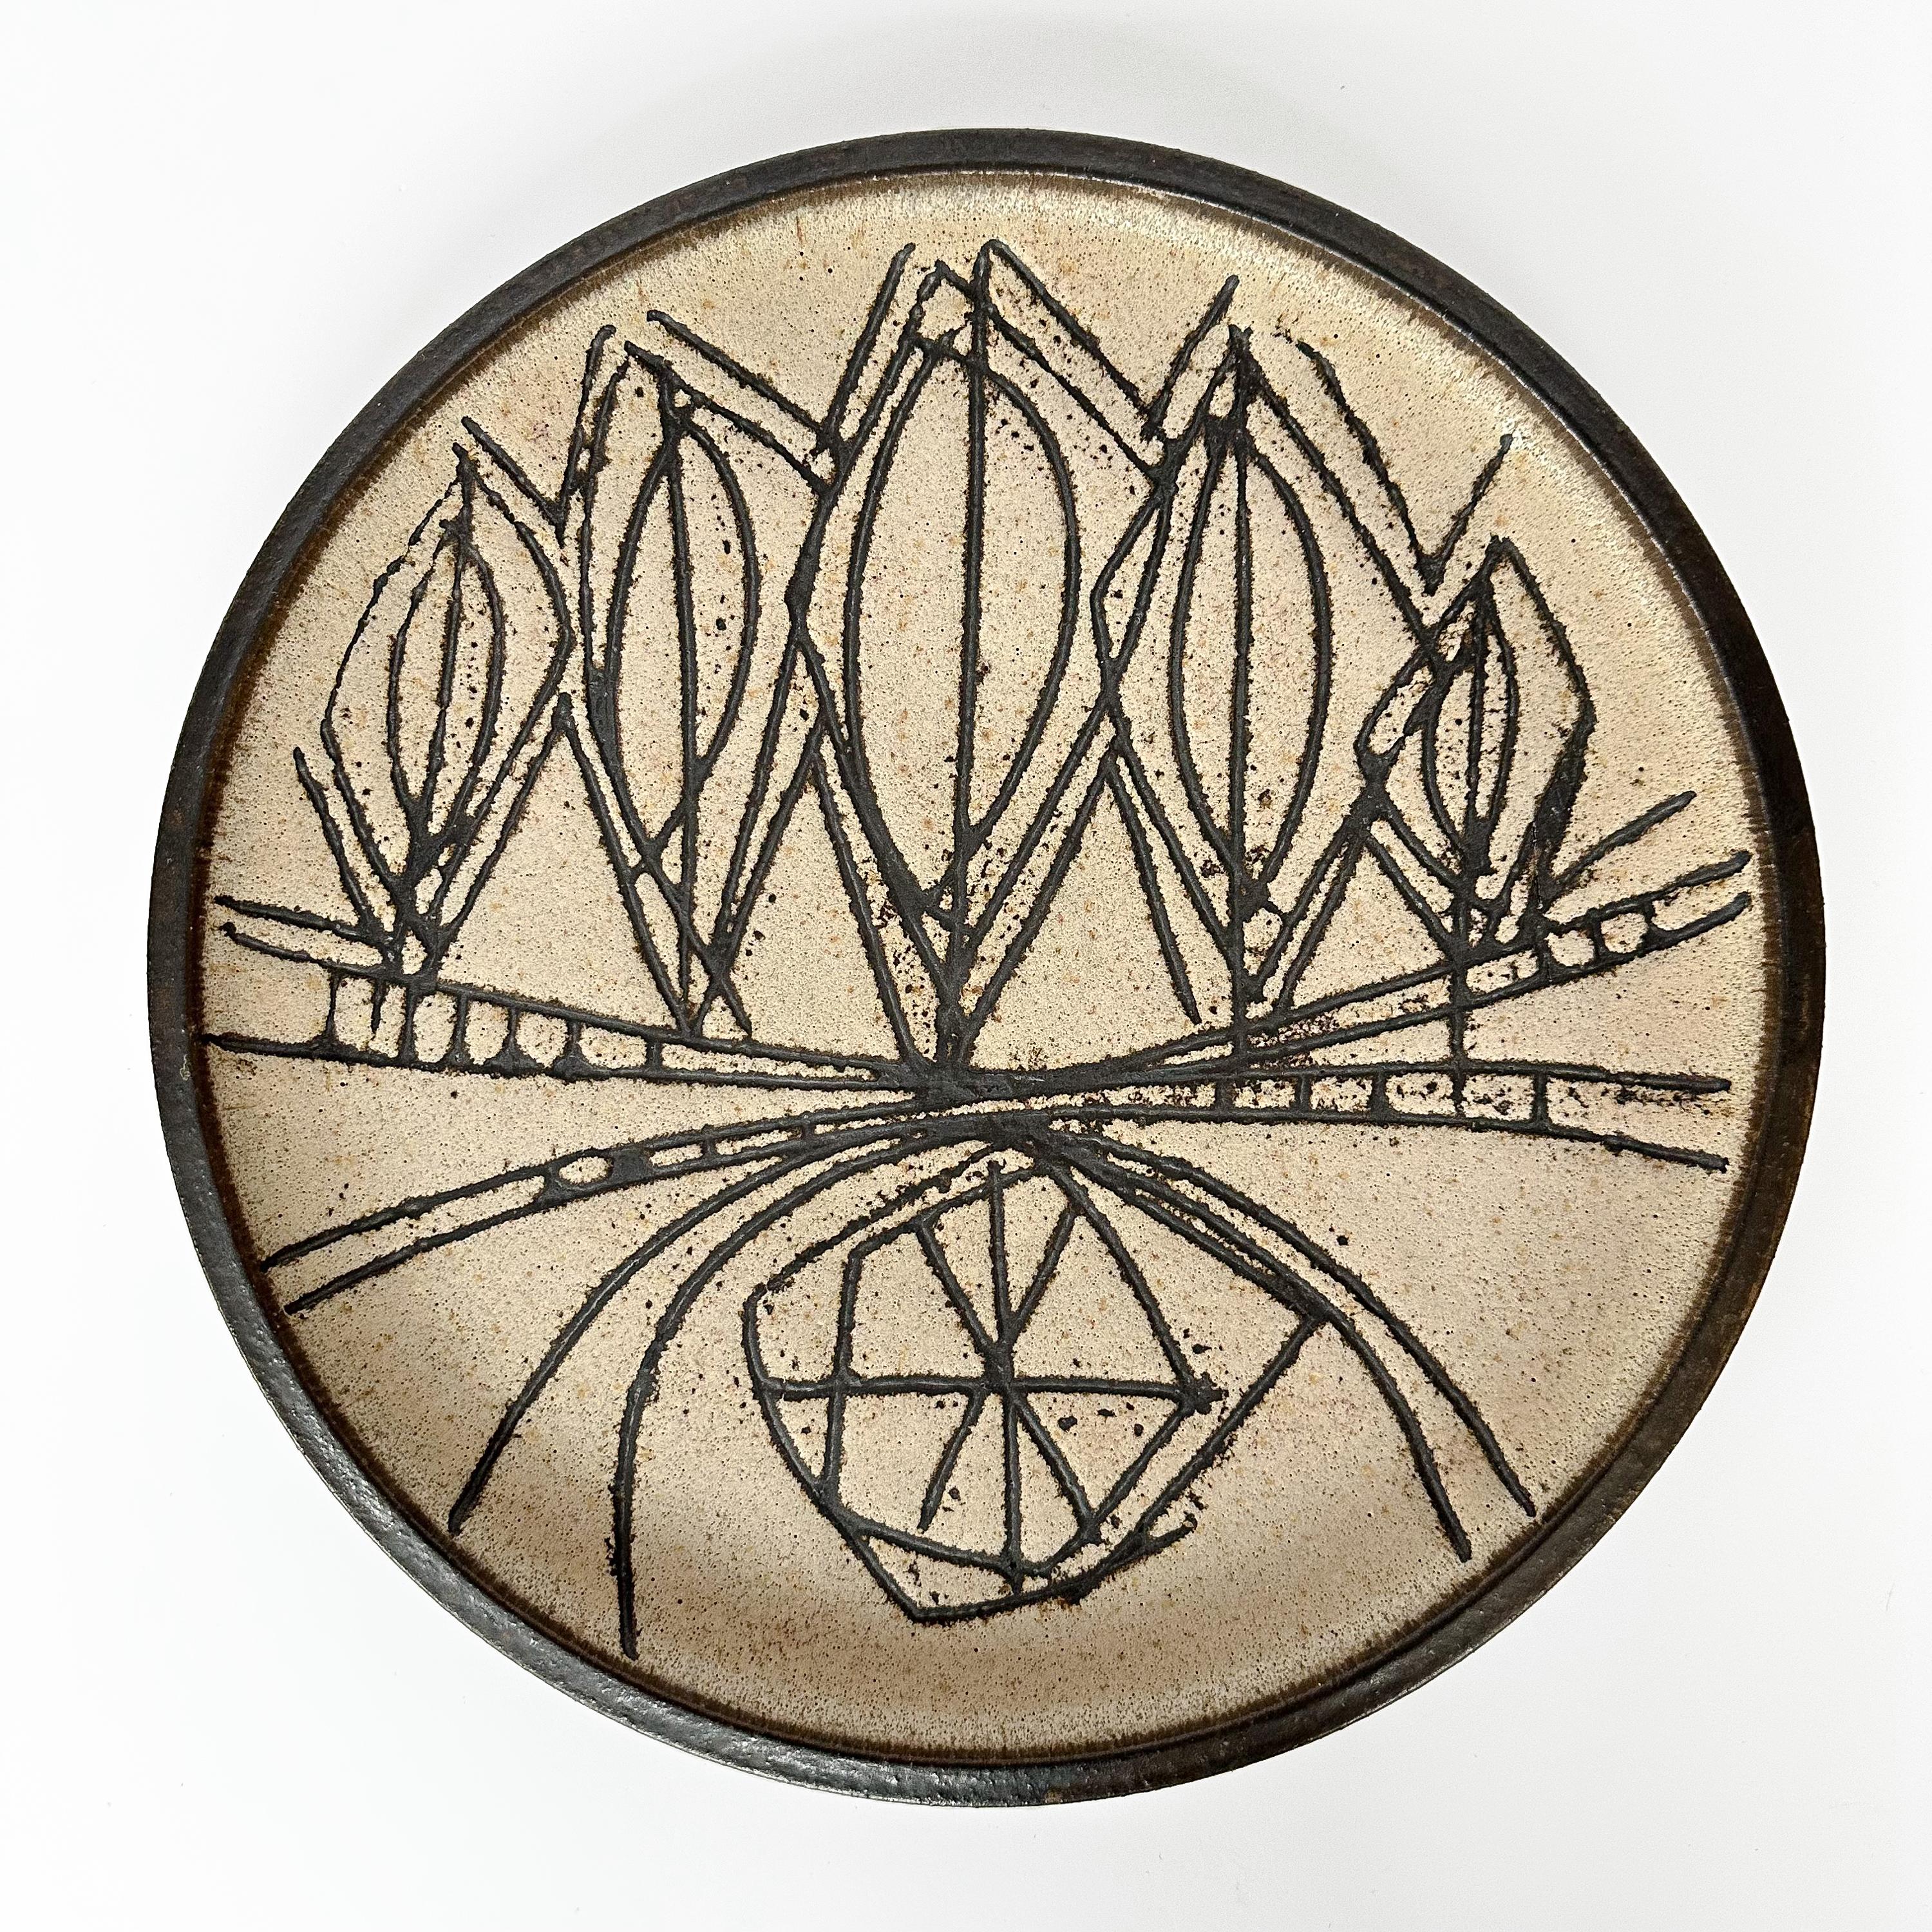 A large Clyde Burt (Ohio, 1922-1981) ceramic charger / plate, circa 1960s. This glazed stoneware charger features a sgraffito abstract design in dark brown on a beige / tan background. Dark brown glazed rim. CB inscribed signature to underside.